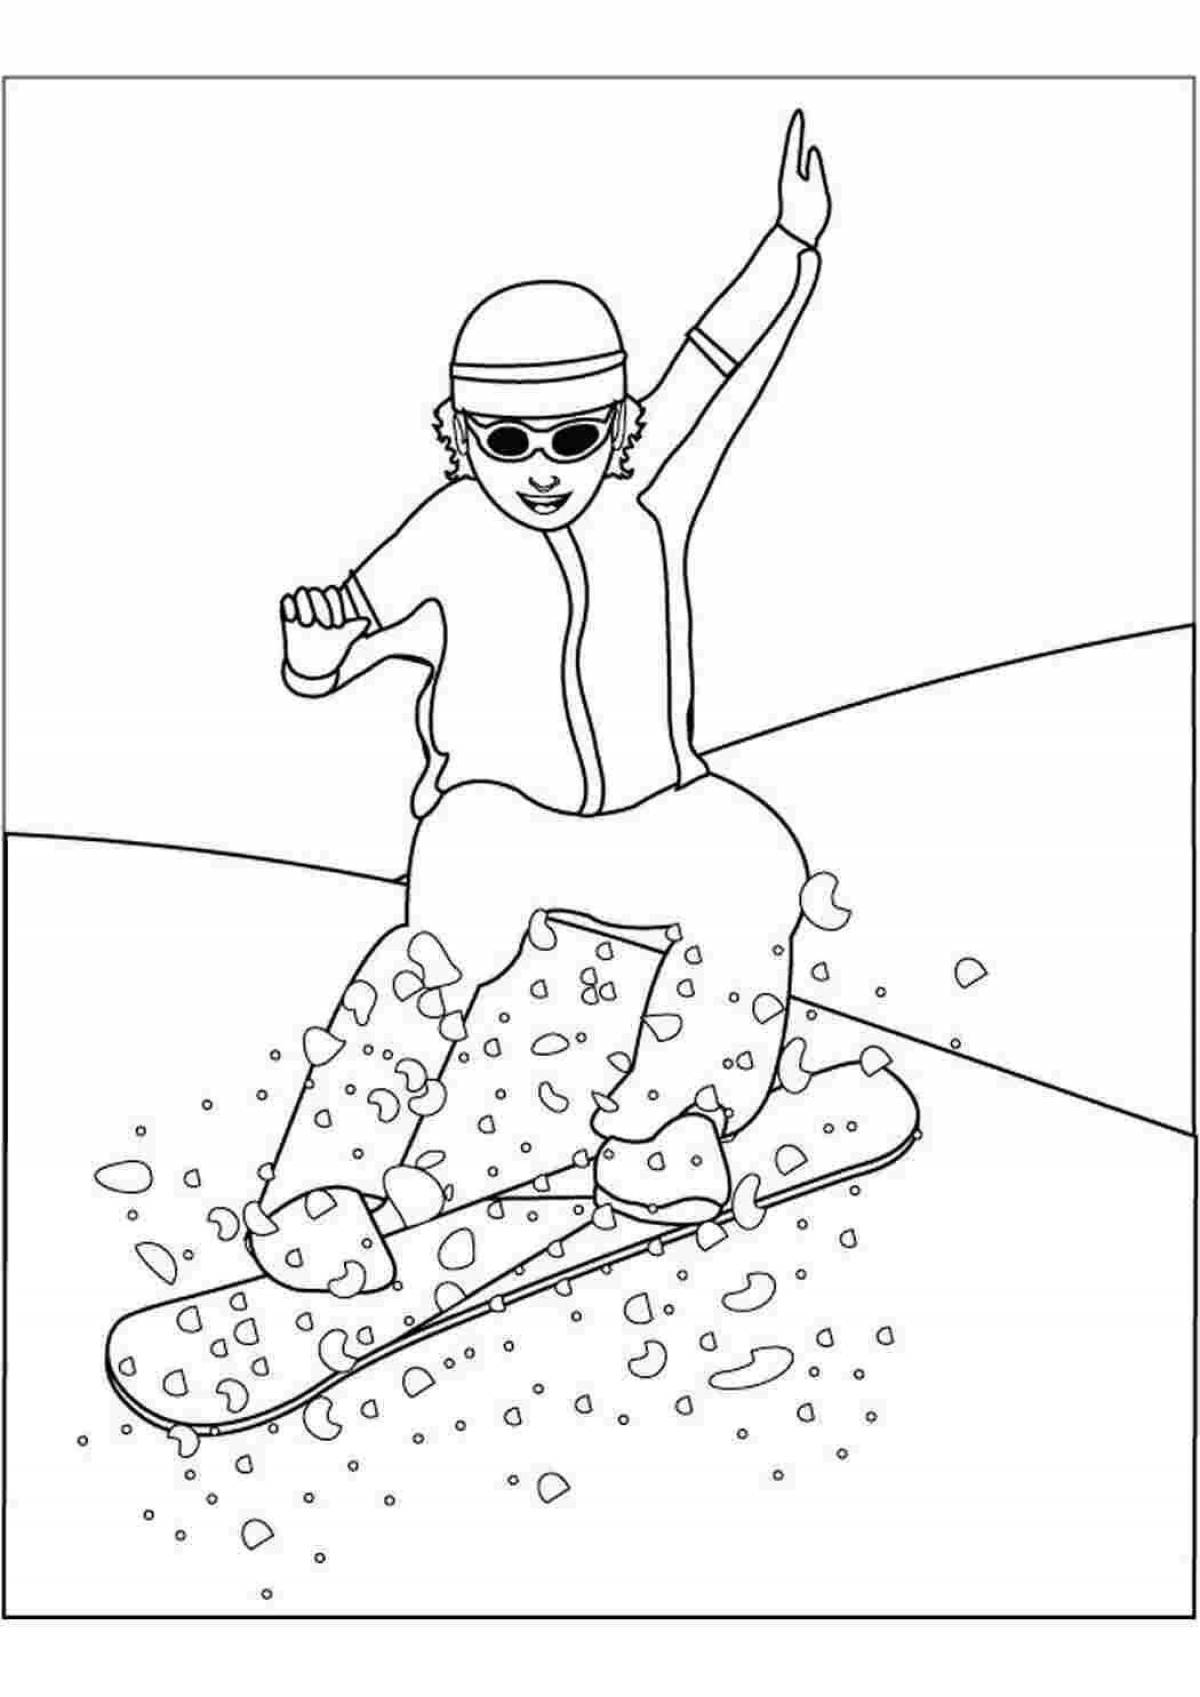 Wonderful coloring book winter sports for children 6-7 years old